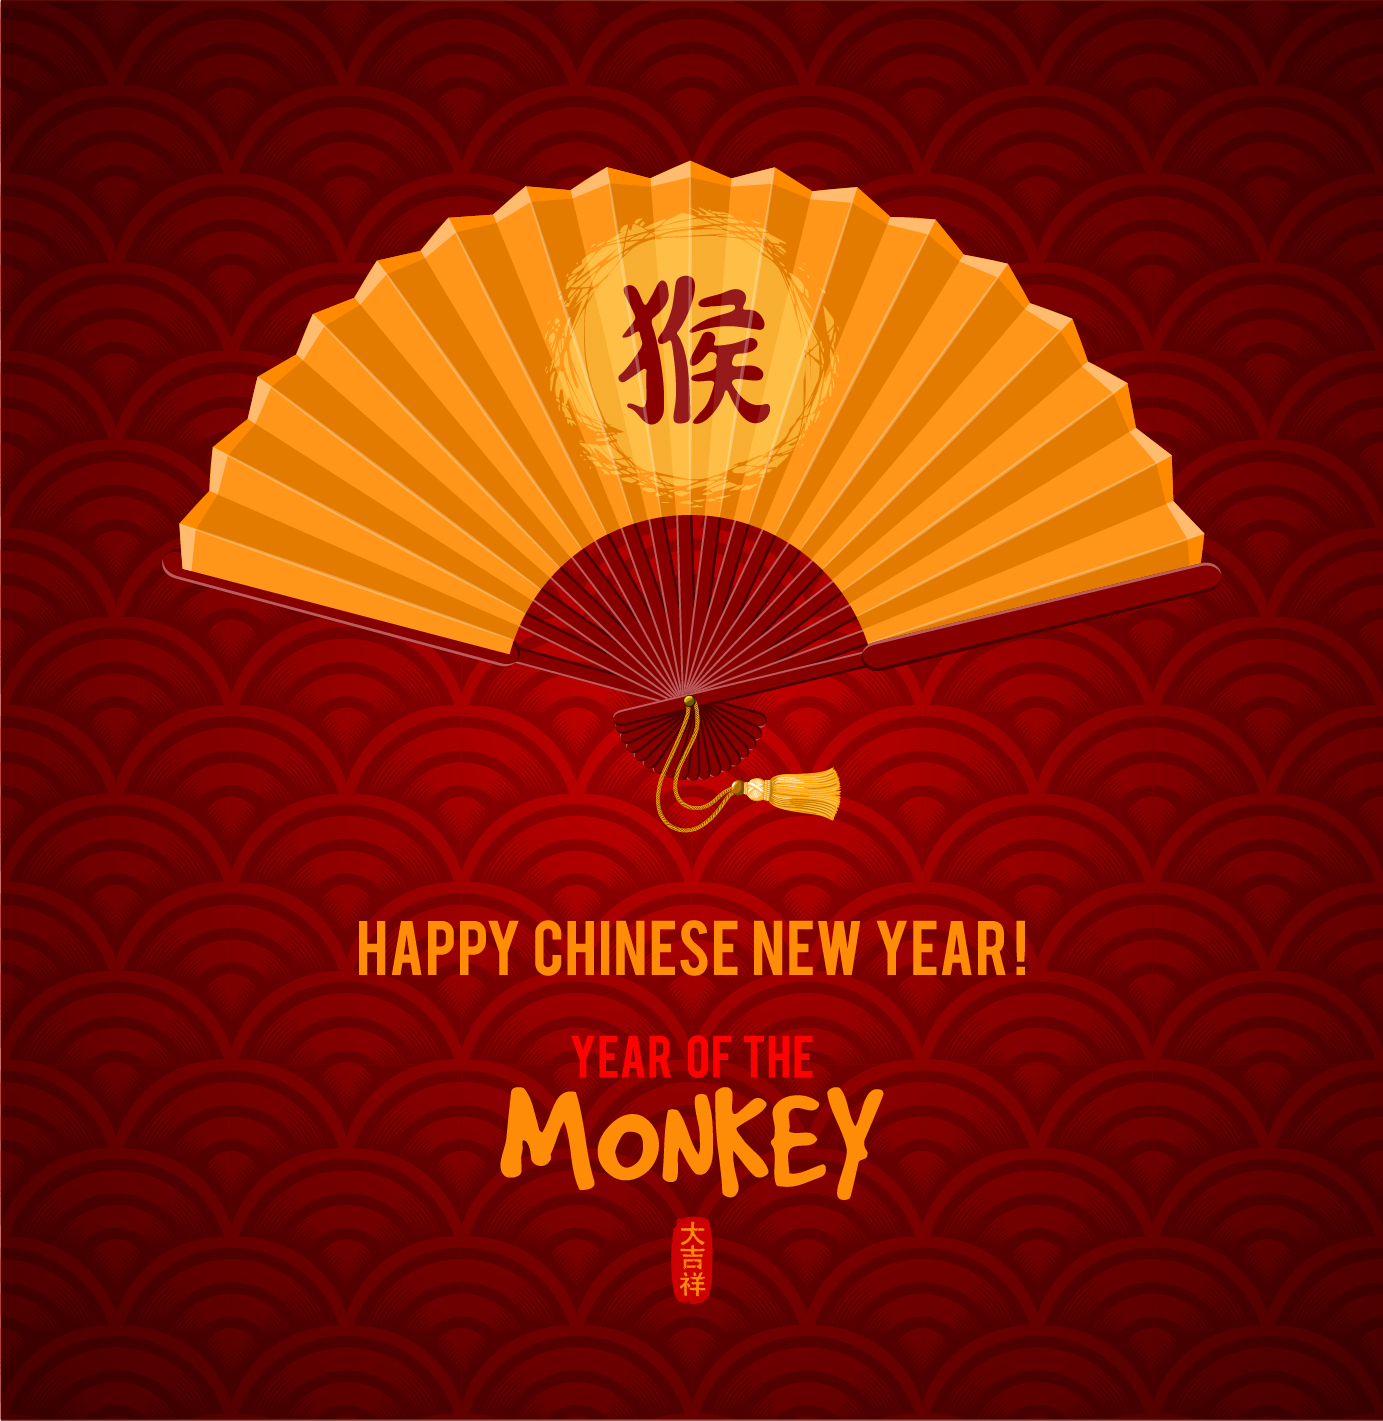 Golden fan with china 2016 monkey new year vector background